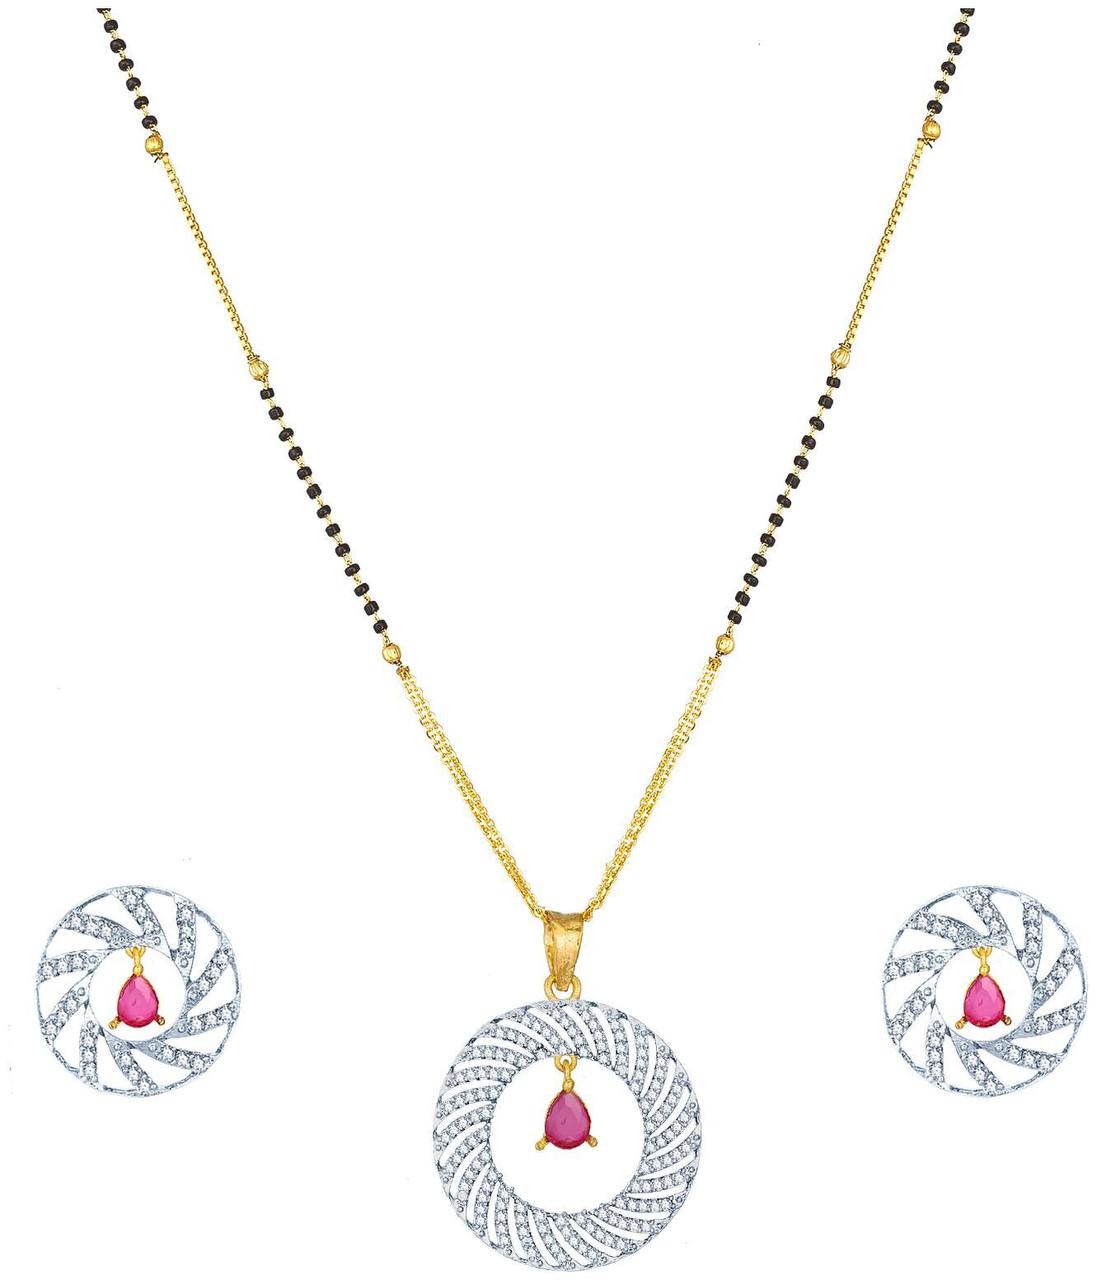 Stunning Imitation Mangalsutra Set with Pendant and Earrings in Durable Alloy Material